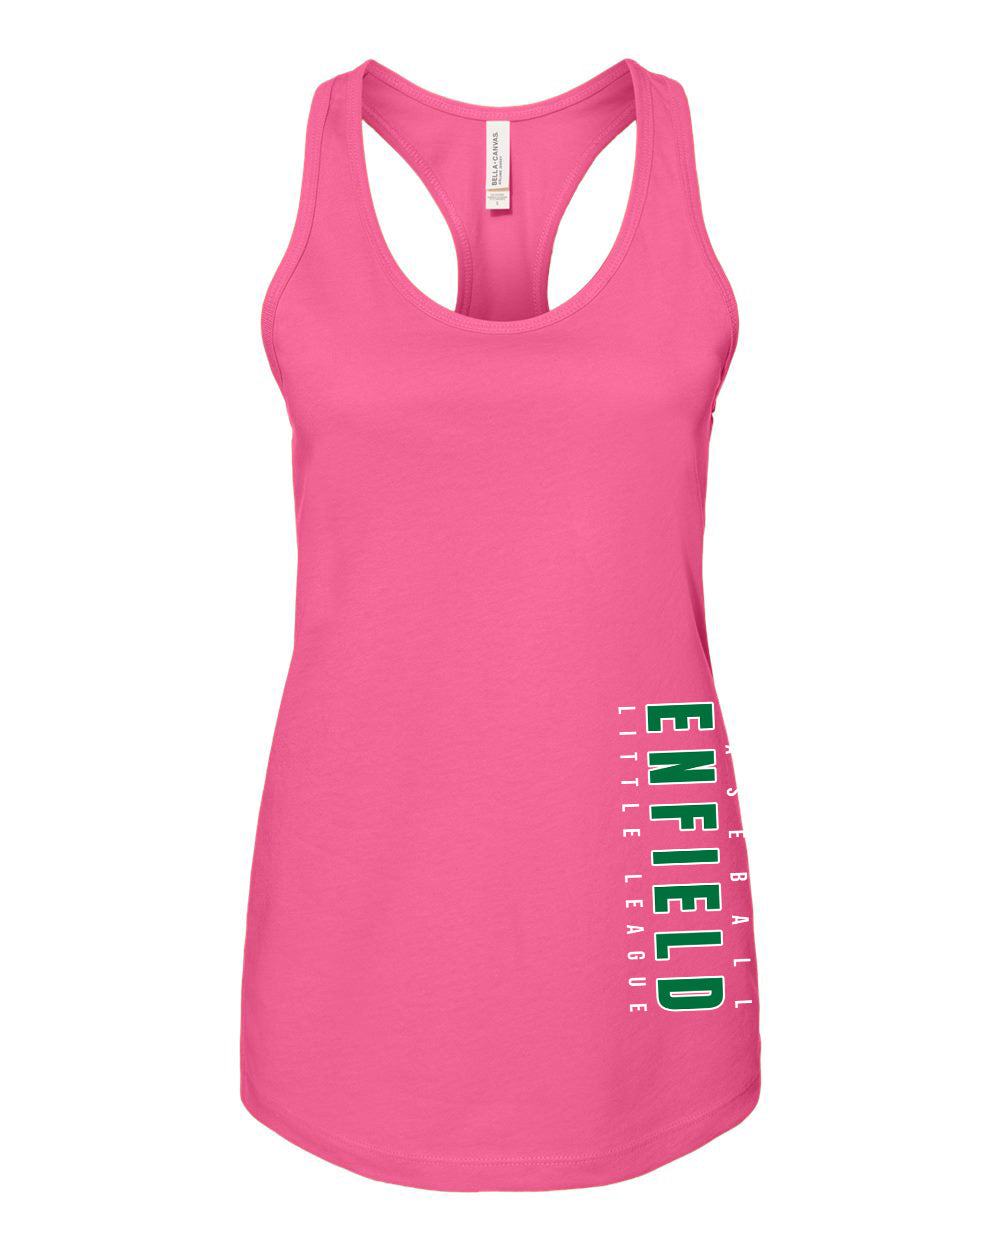 ELL Ladies Tank Top "ELL Side" - 6008 (color options available)